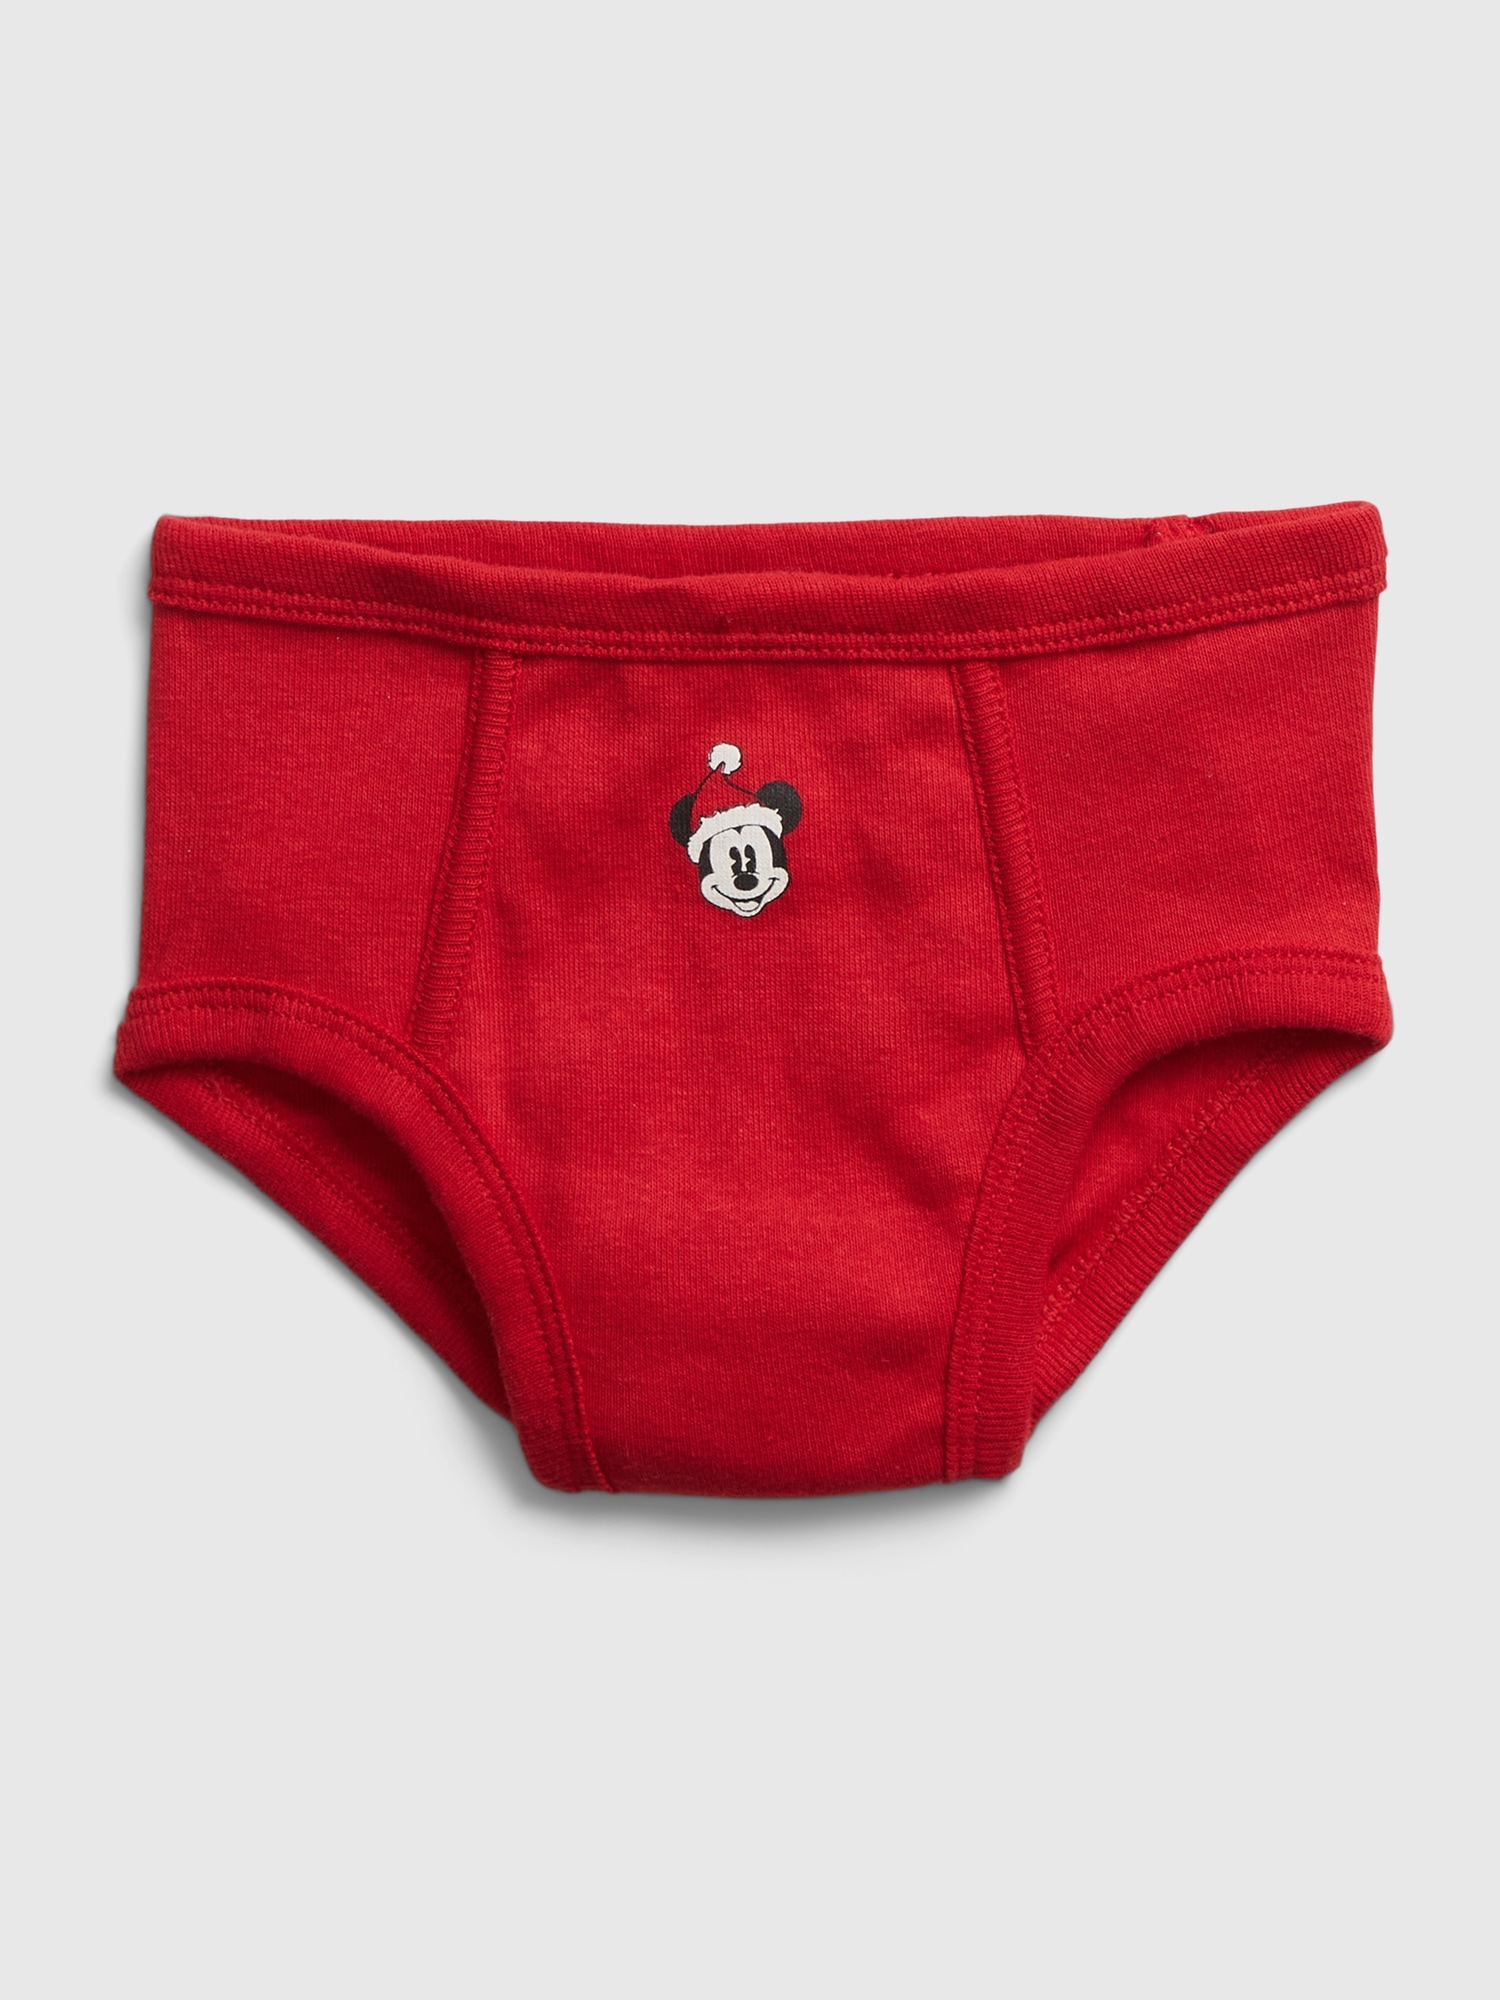 Baby Products Online - A pack of training pants in a Mickey Mouse